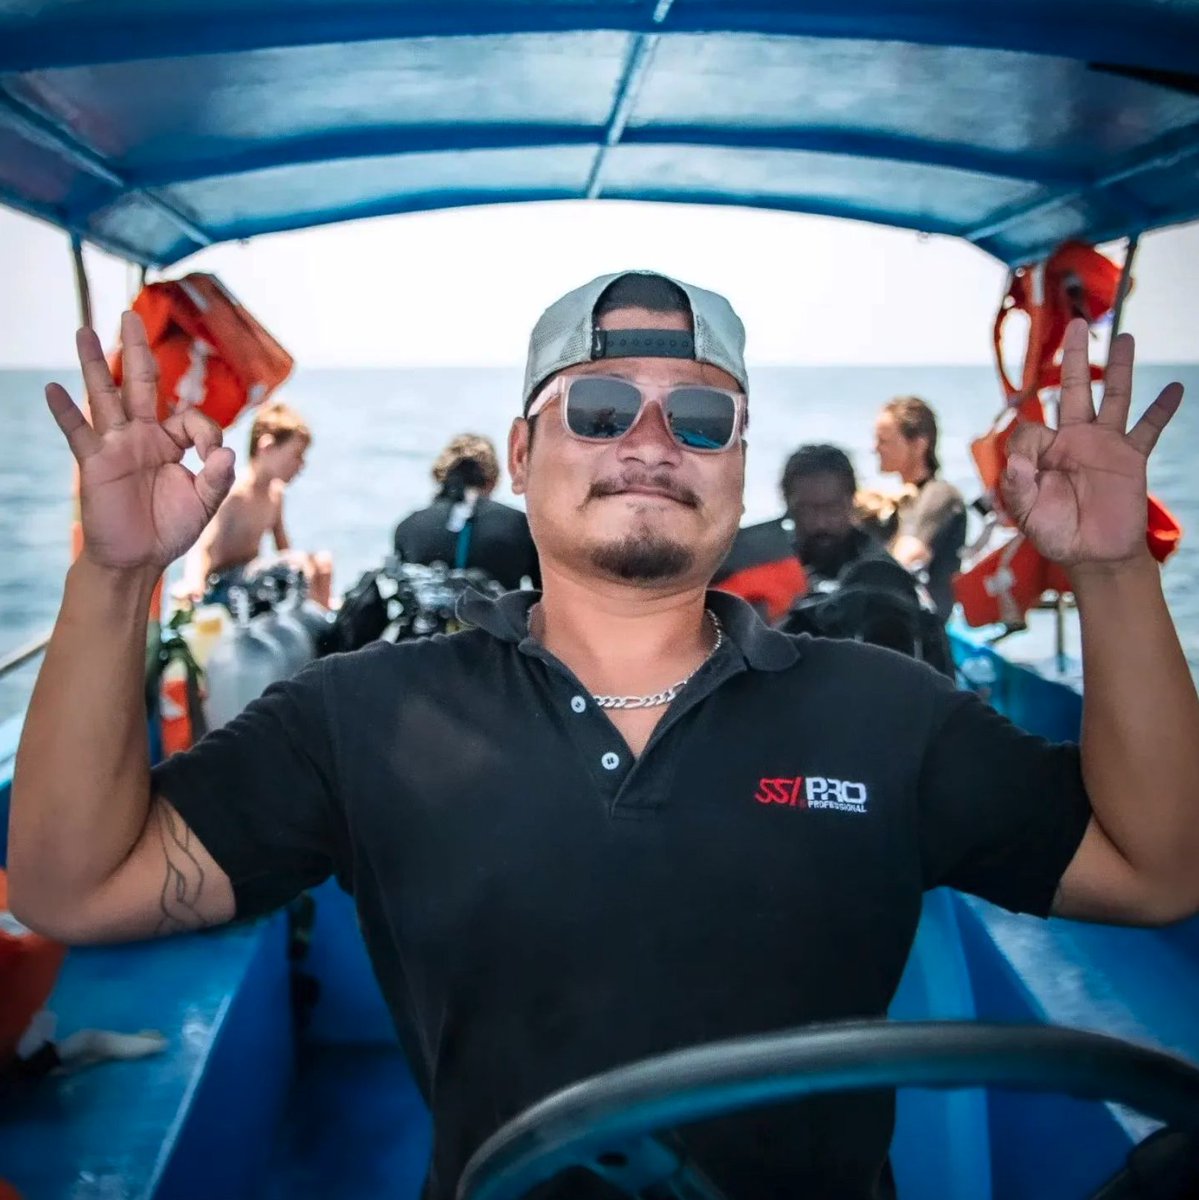 There is more to being an SSI dive pro than just diving. What's your favorite part of the job? 📸@rymus_tremdbo #wearessi #divessi #ssipro #boatdiving #scubadiving #freediving